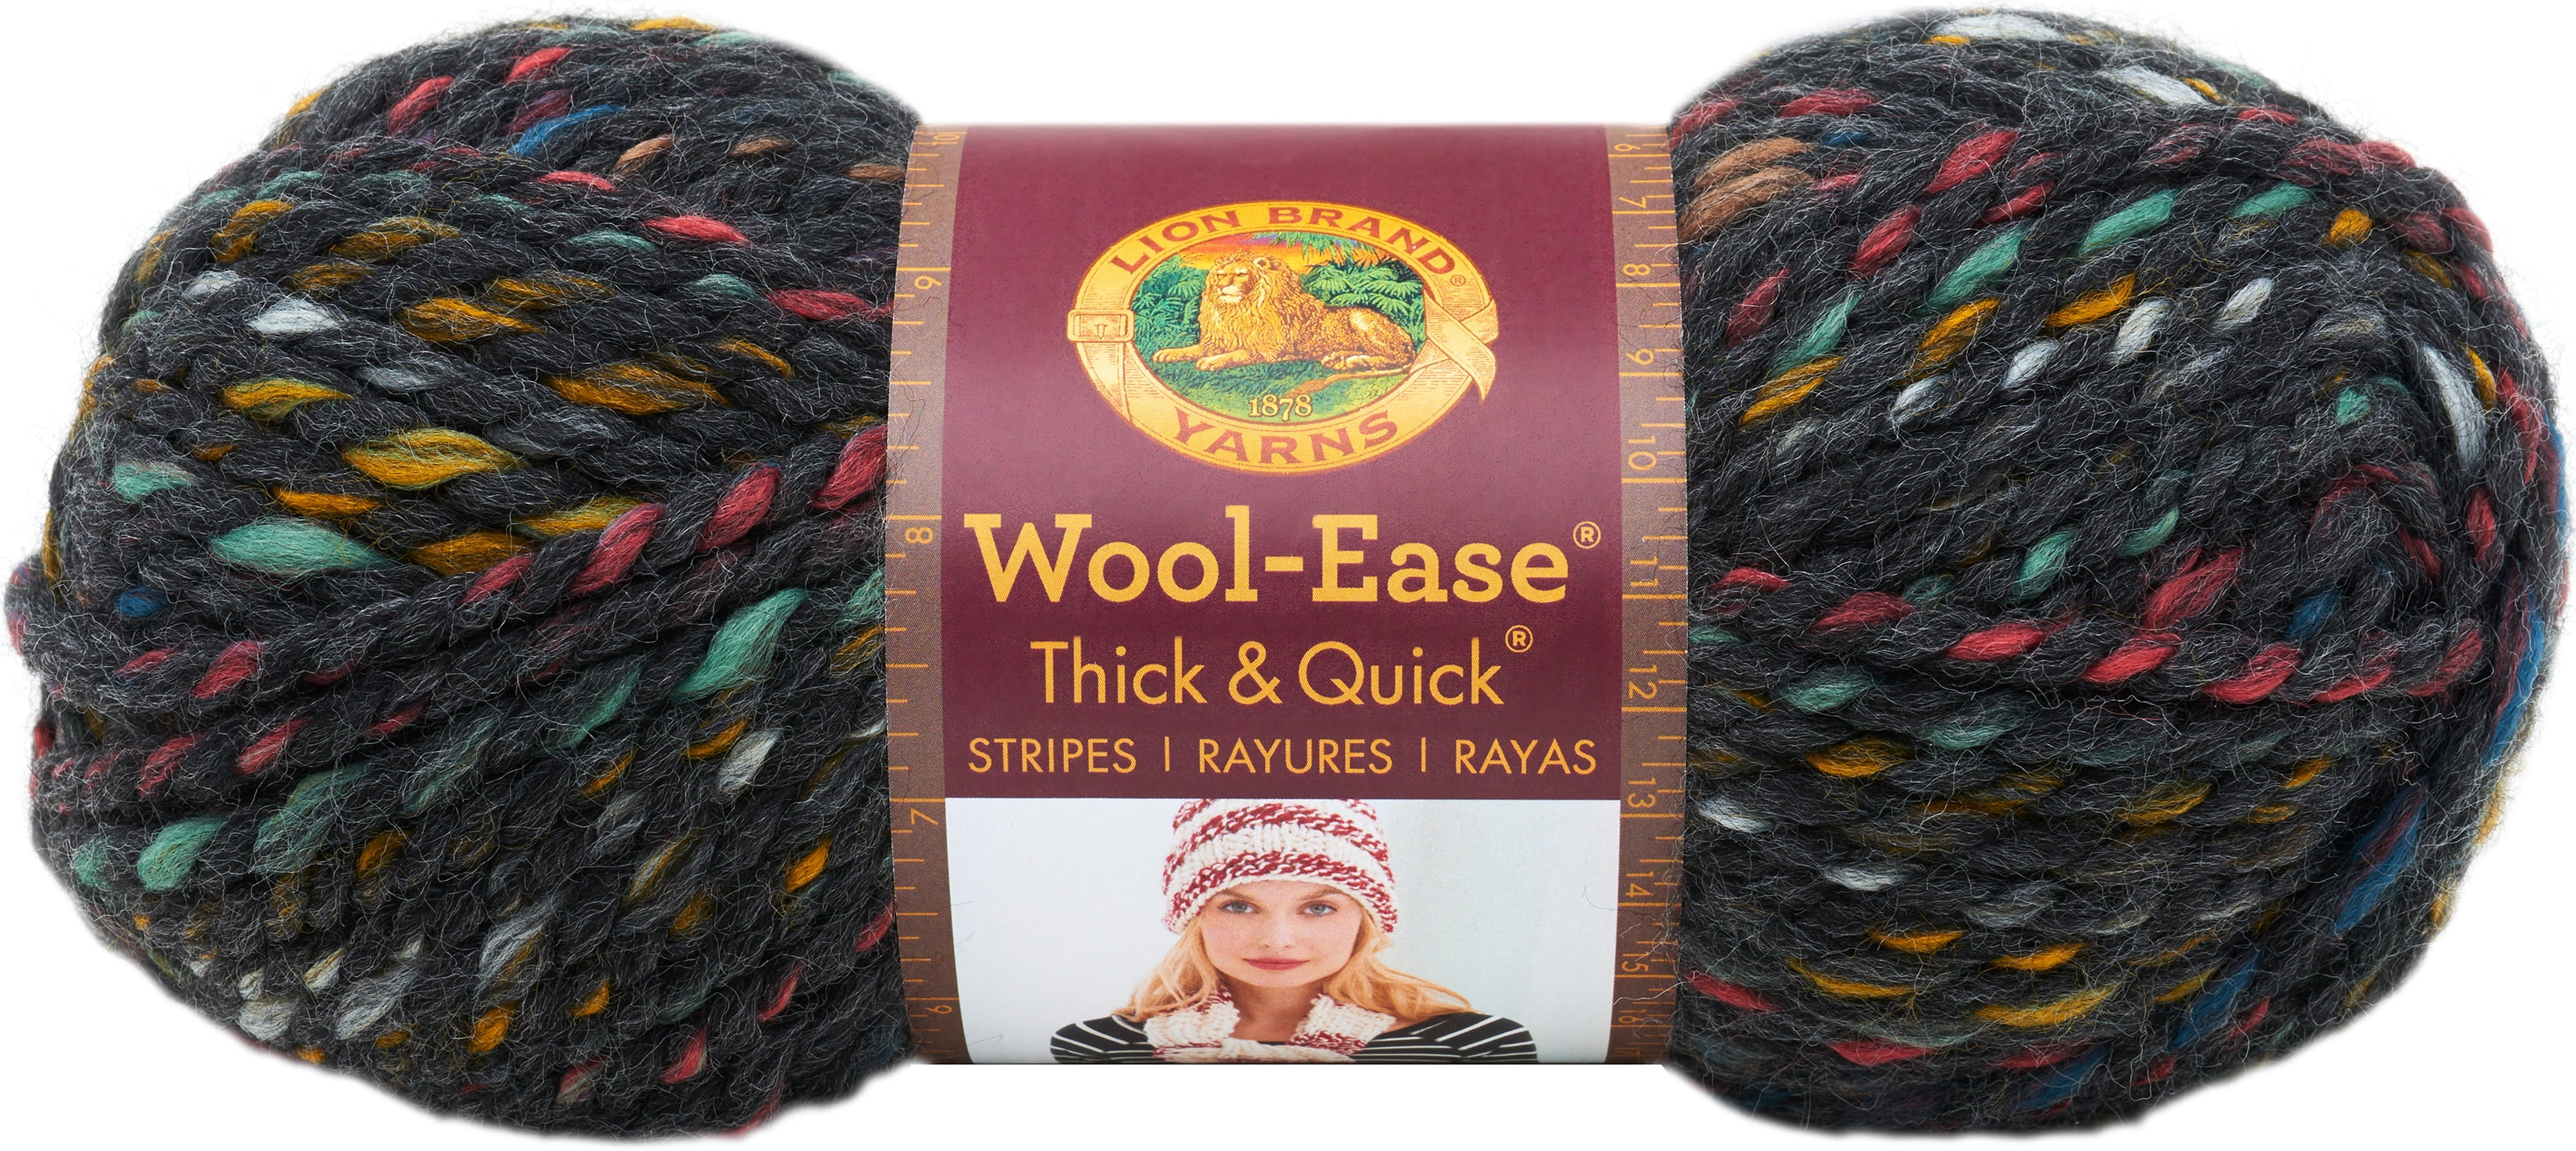 Lion Brand Yarn Wool-Ease Thick and Quick Bedrock Classic Super Bulky Acrylic, Wool Multi-color Multi-color Yarn